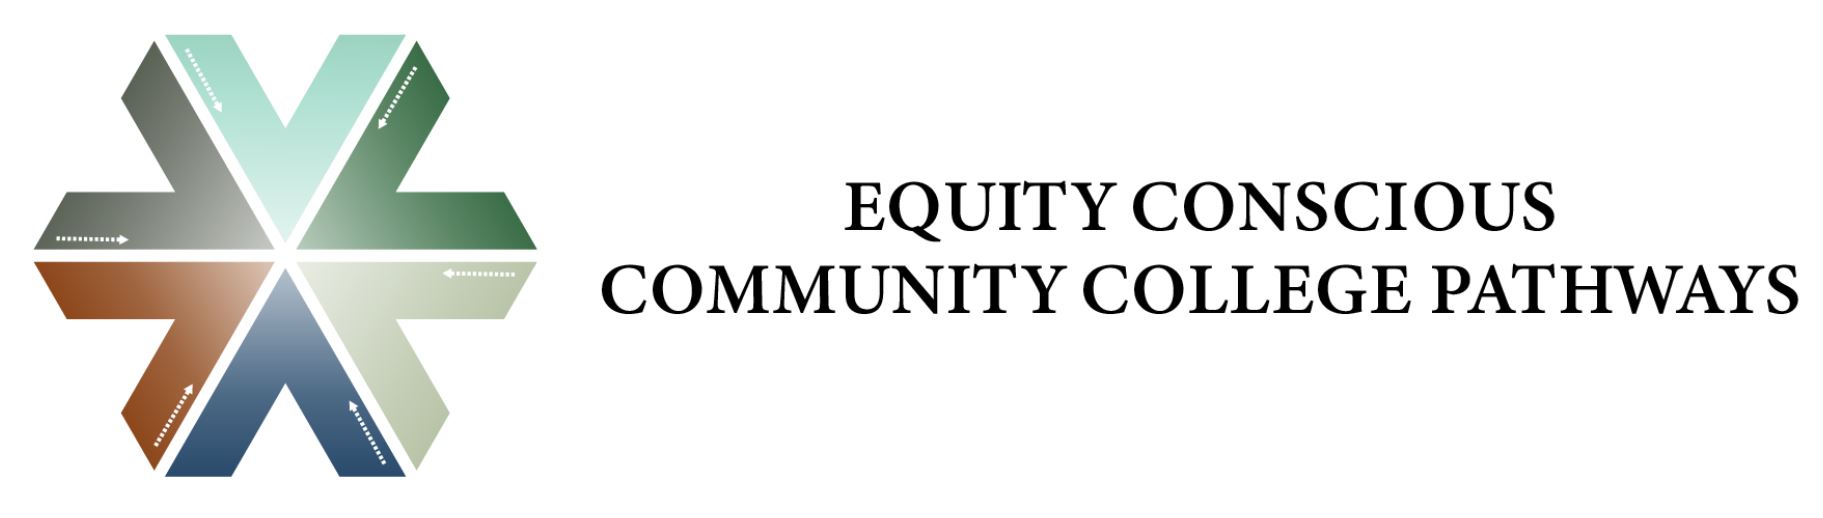 Equity Conscious Community College Pathways